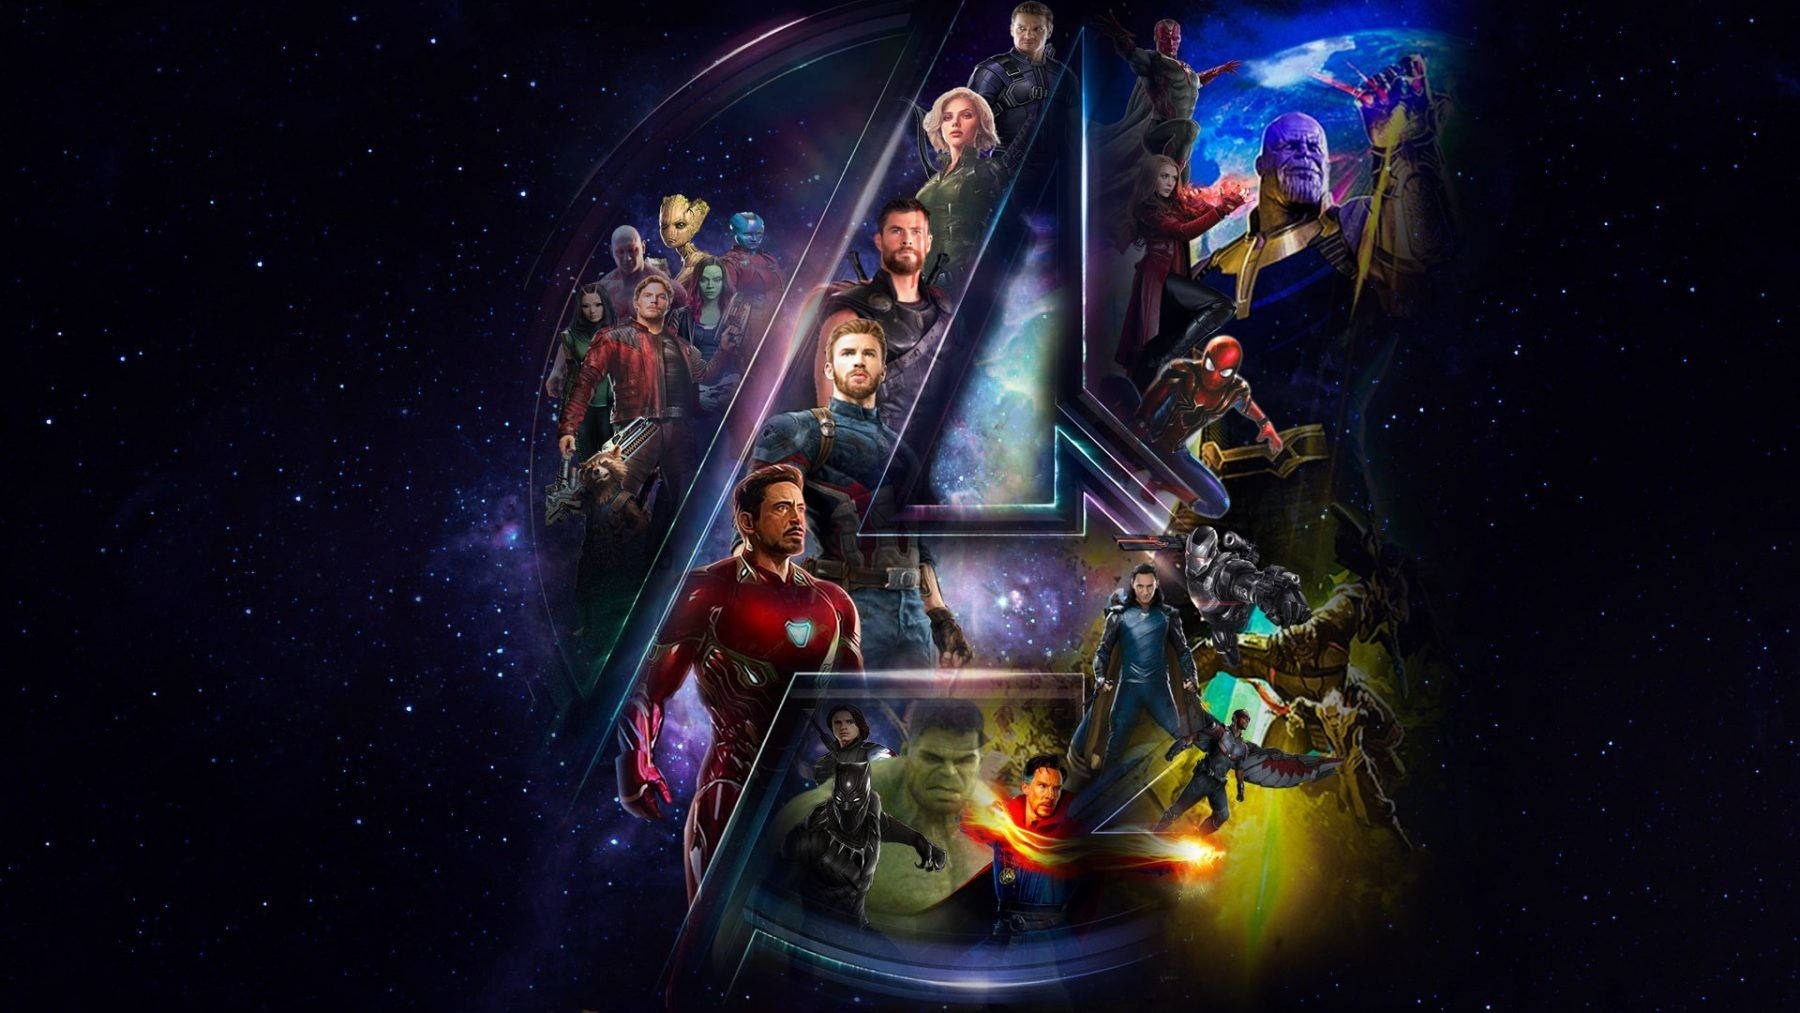 Avengers superhero characters in one starry background.